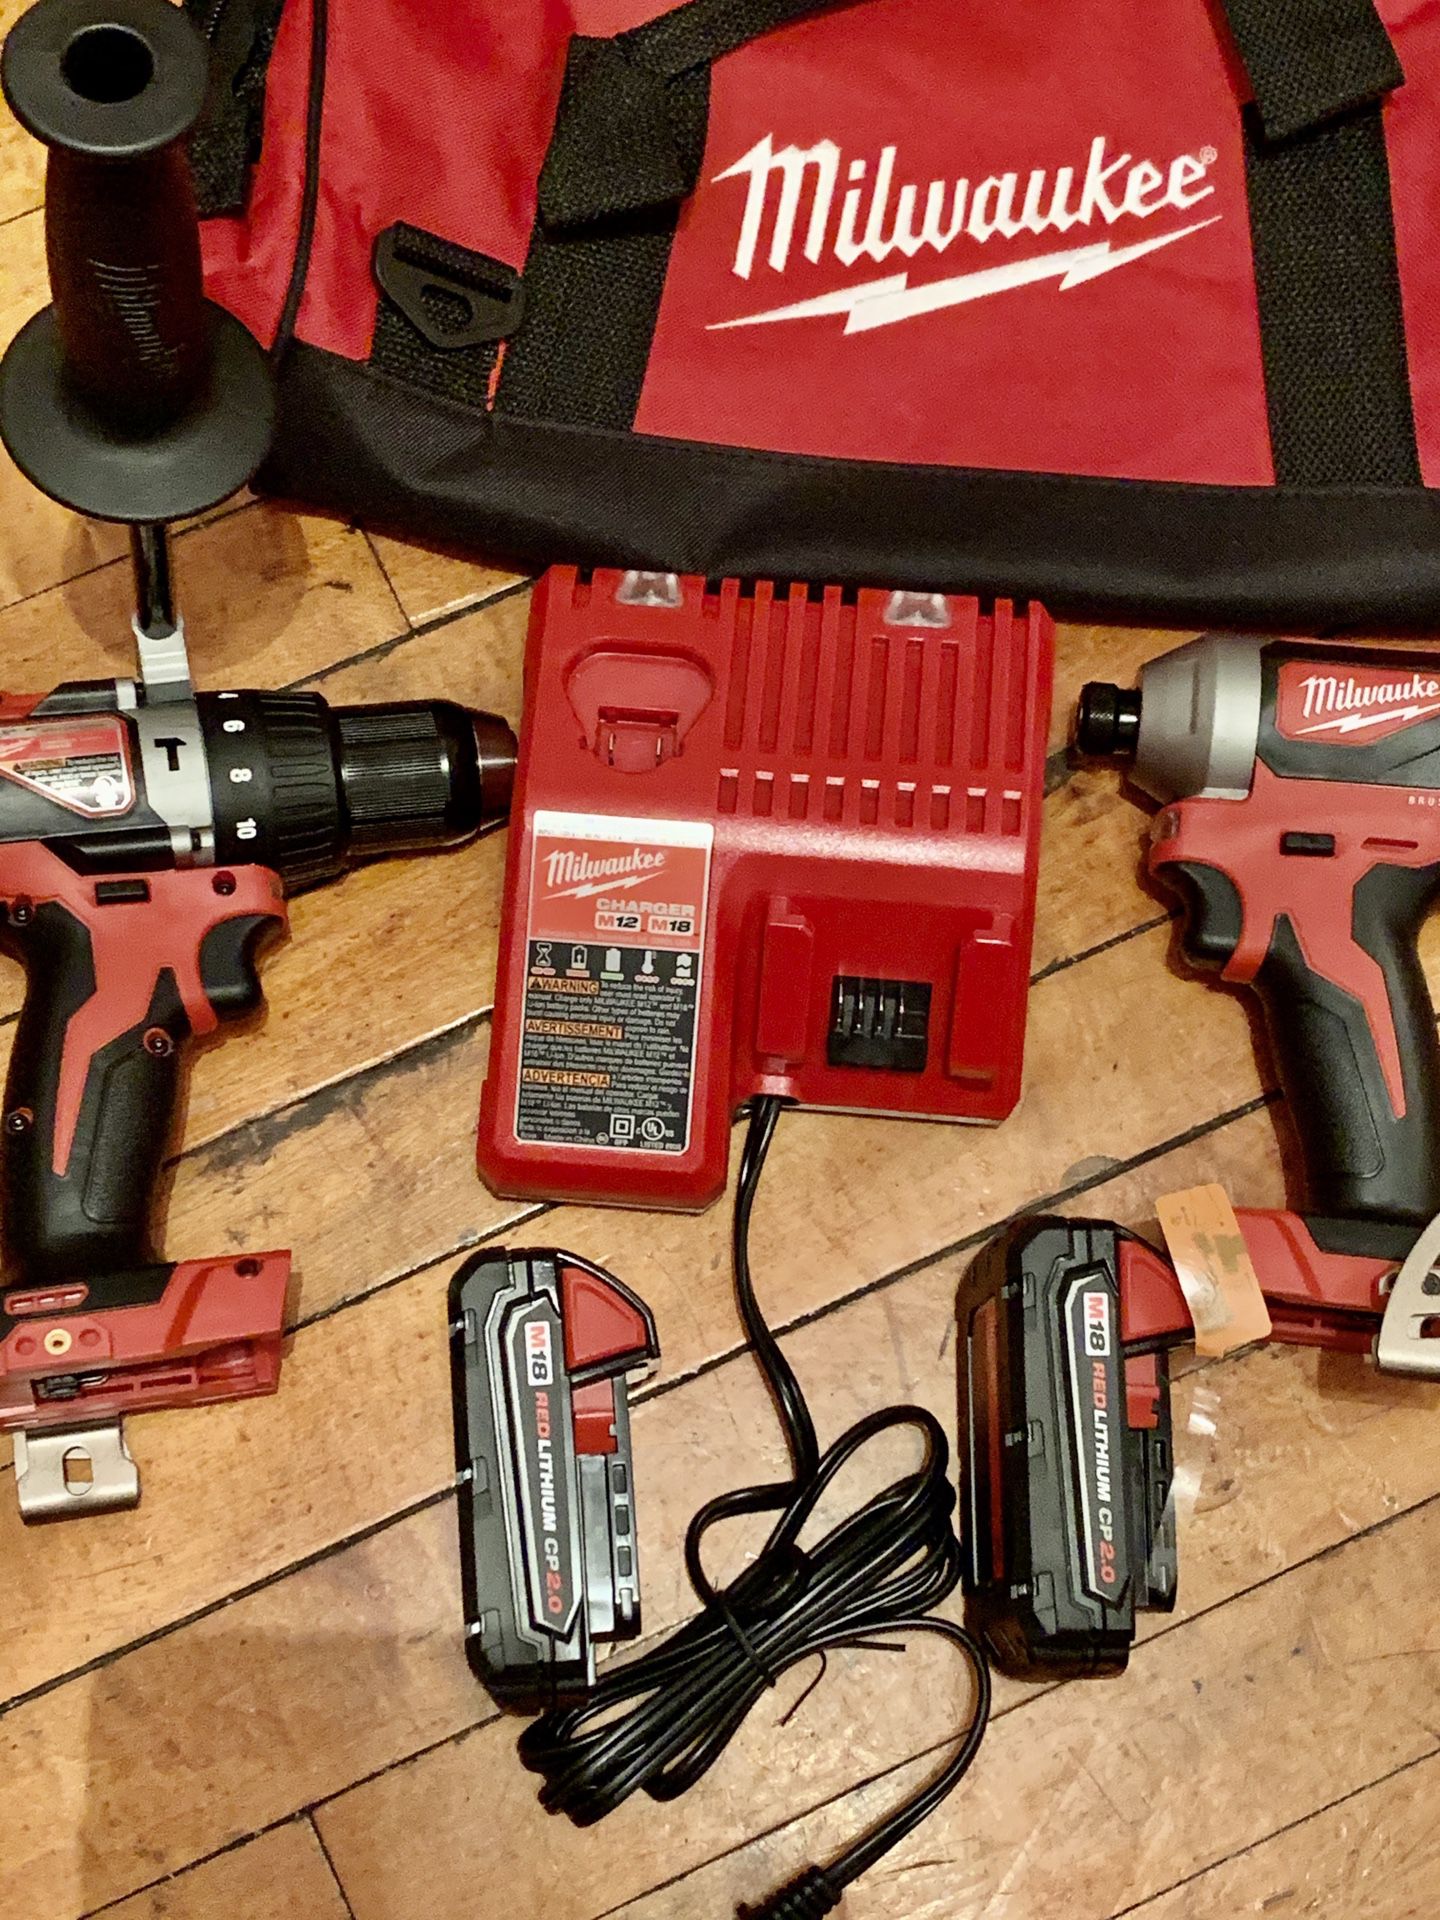 MILWAUKEE M18 INCLUDED HAMMER DRILL IMPACT DRIVER 2 battery charger